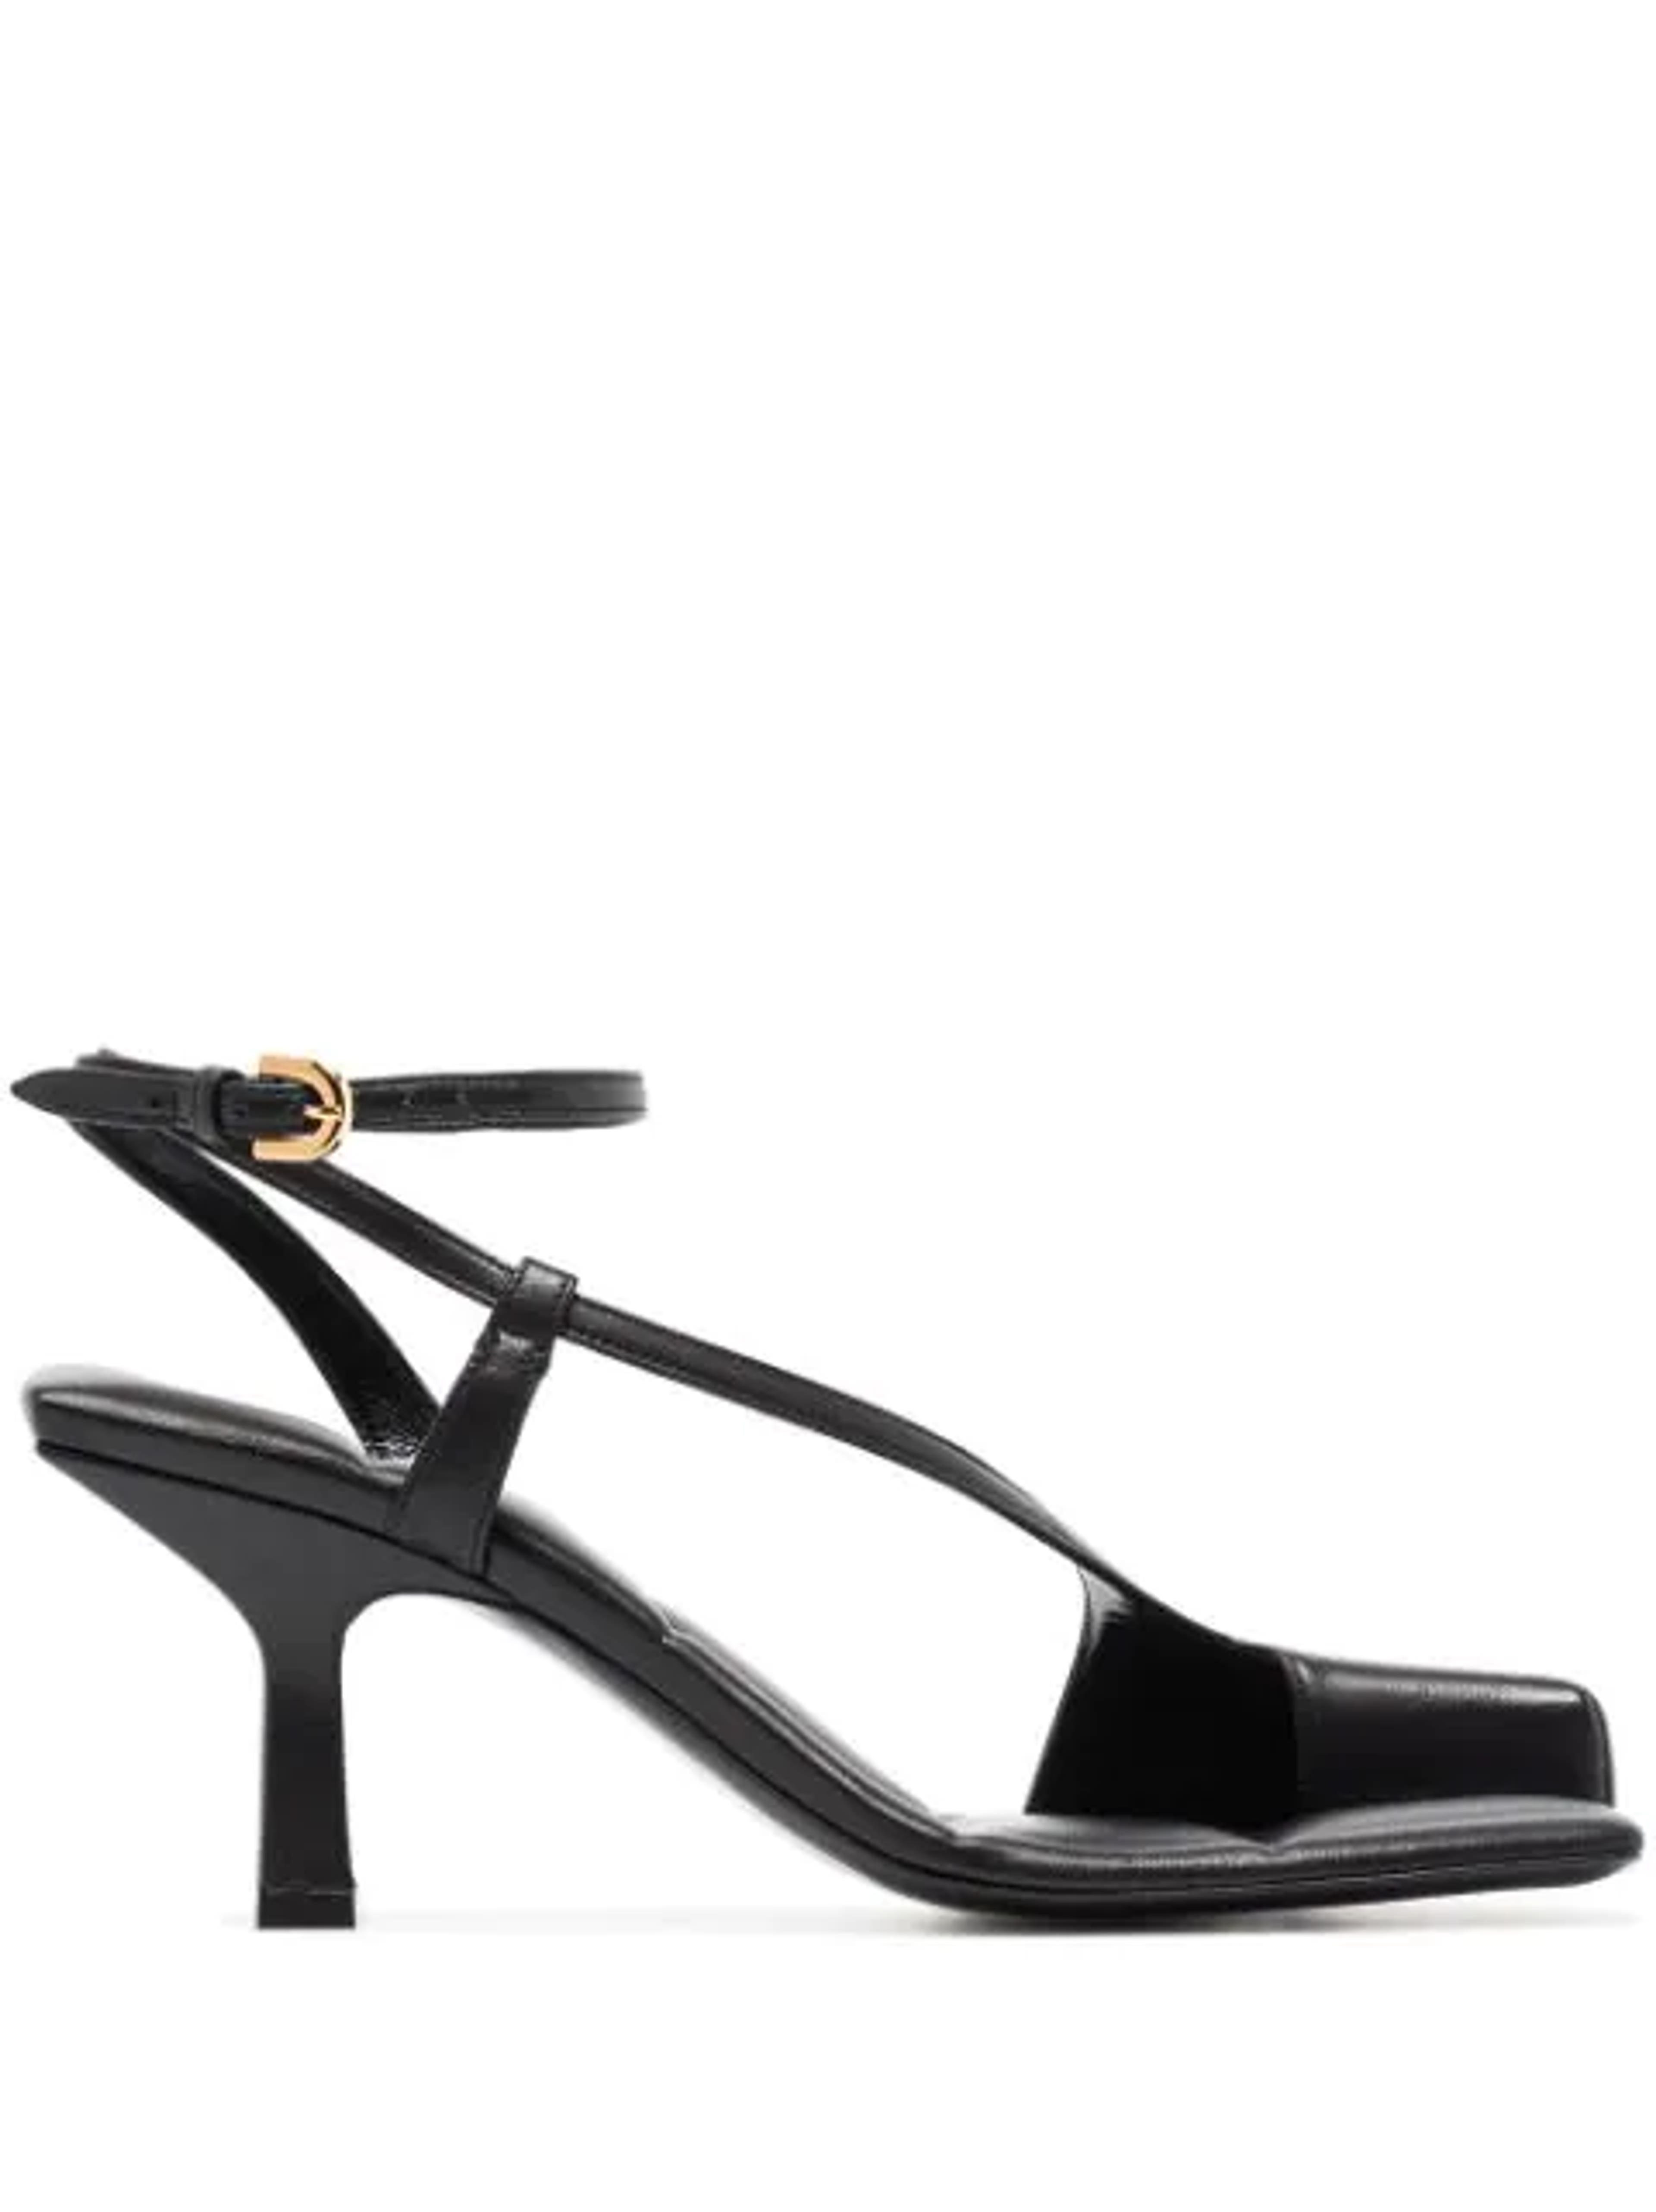 Shop KHAITE Berlin slingback sandals with Express Delivery - FARFETCH